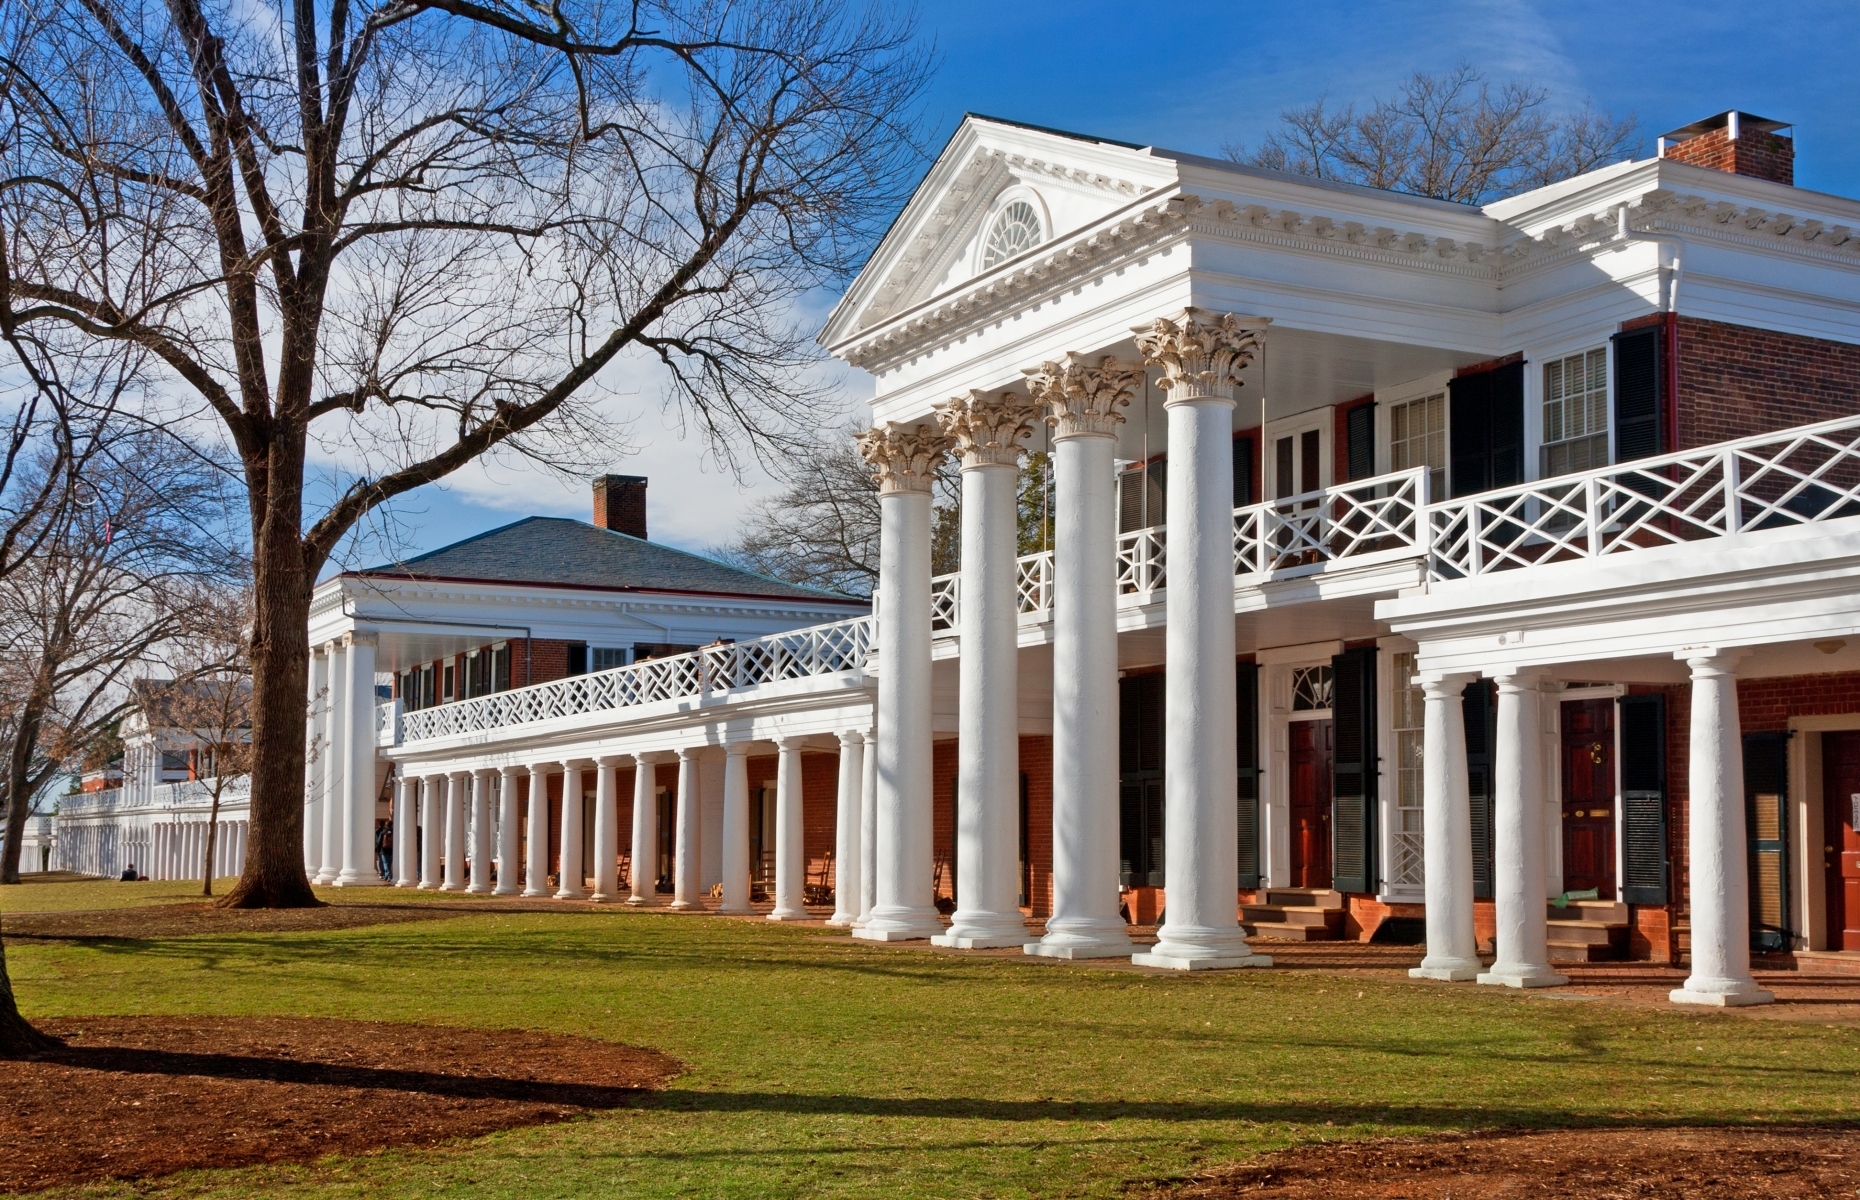 <p>The UNESCO World Heritage–listed <a href="http://www.virginia.edu/visit/grounds" rel="noreferrer noopener">University of Virginia</a> in Charlottesville was designed by Thomas Jefferson, who conceived the Academical Village (pictured), an impressive collection of Neoclassical buildings arranged in a U-shape around a central lawn.</p>